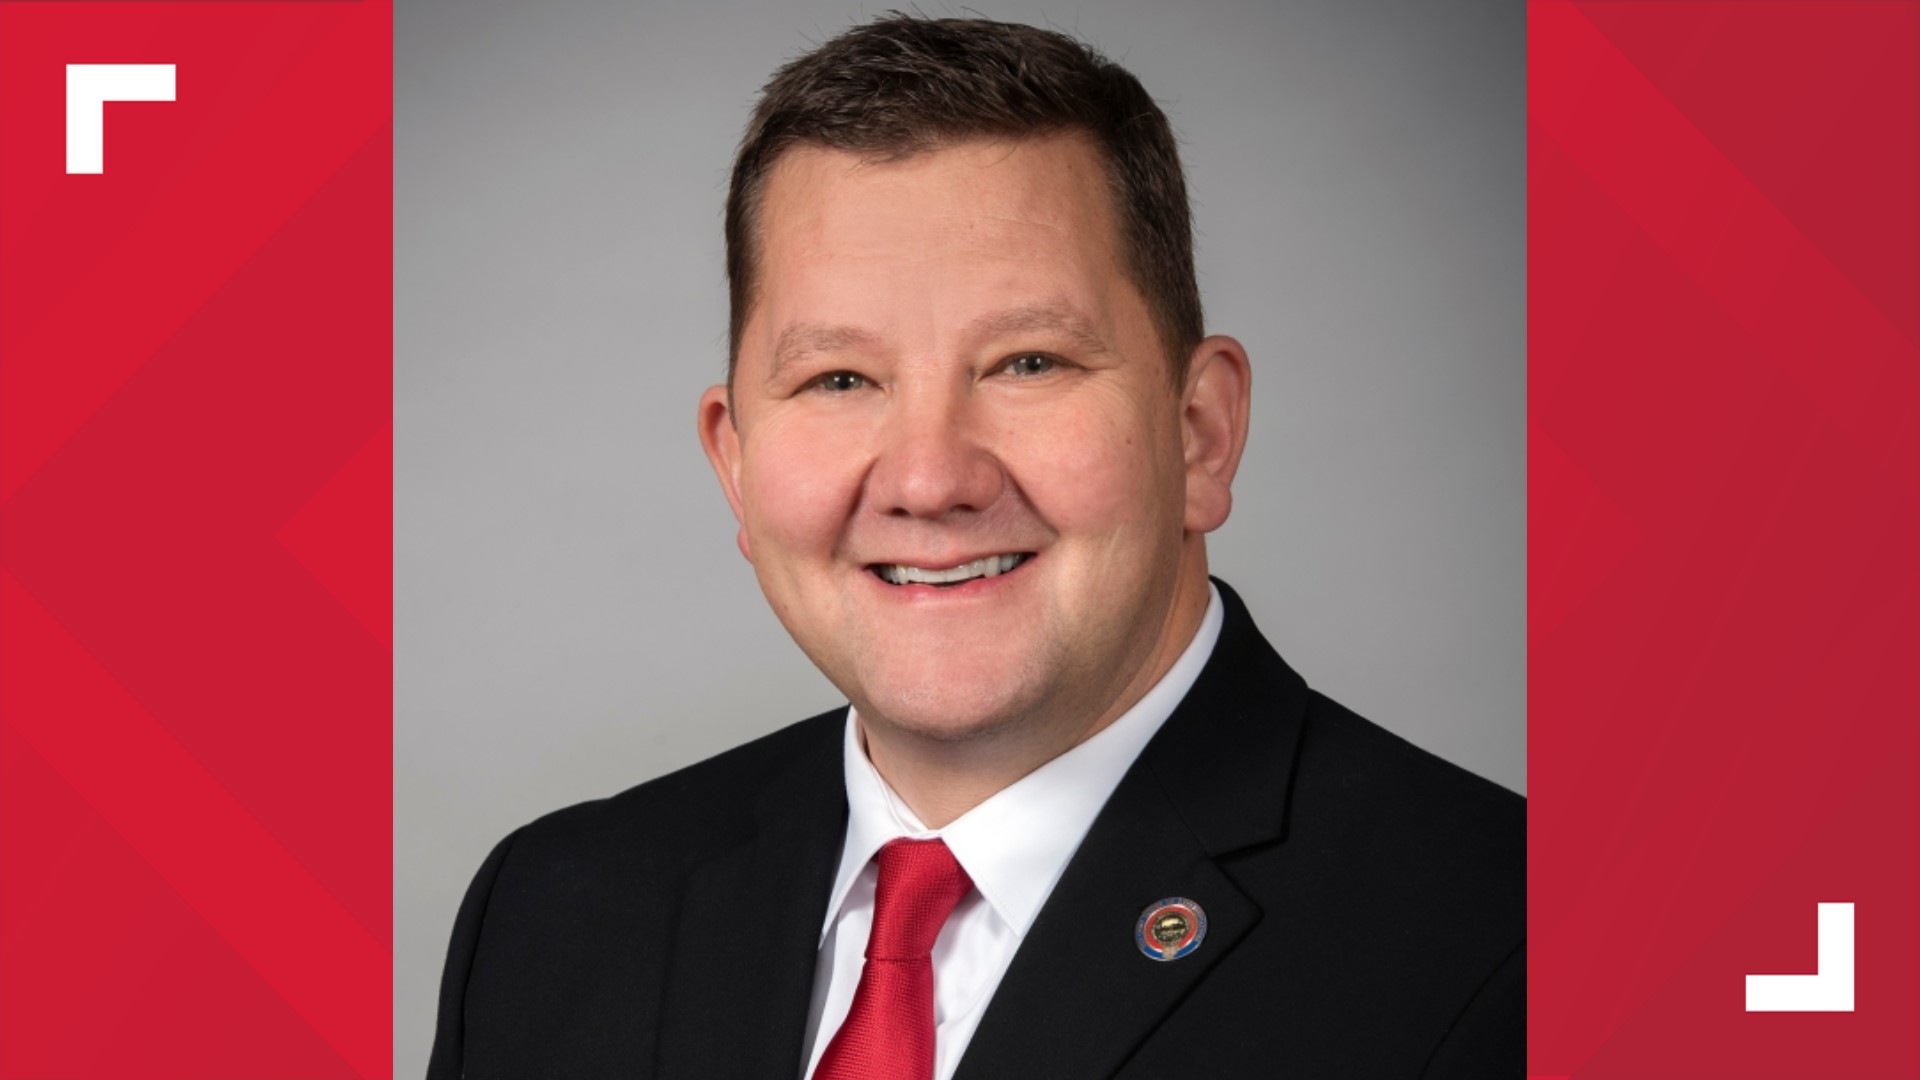 Republican Rep. Bob Young notified GOP House Speaker Jason Stephens that his resignation would take effect Oct. 2.